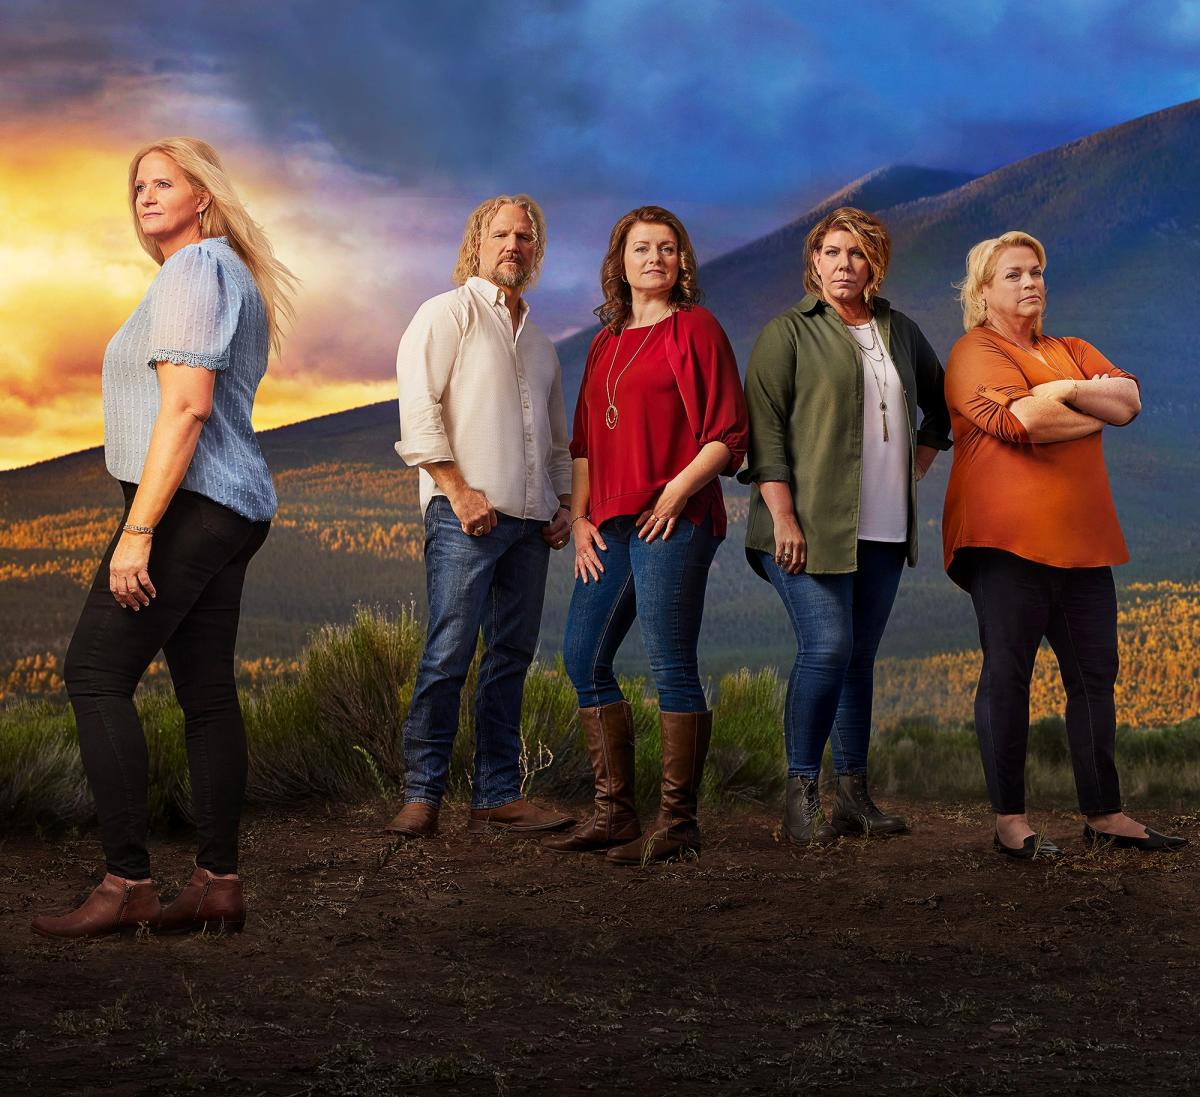 Sister Wives' Season 18 Premiere: Don't Miss the Drama - Watch and Live Stream Now! 12